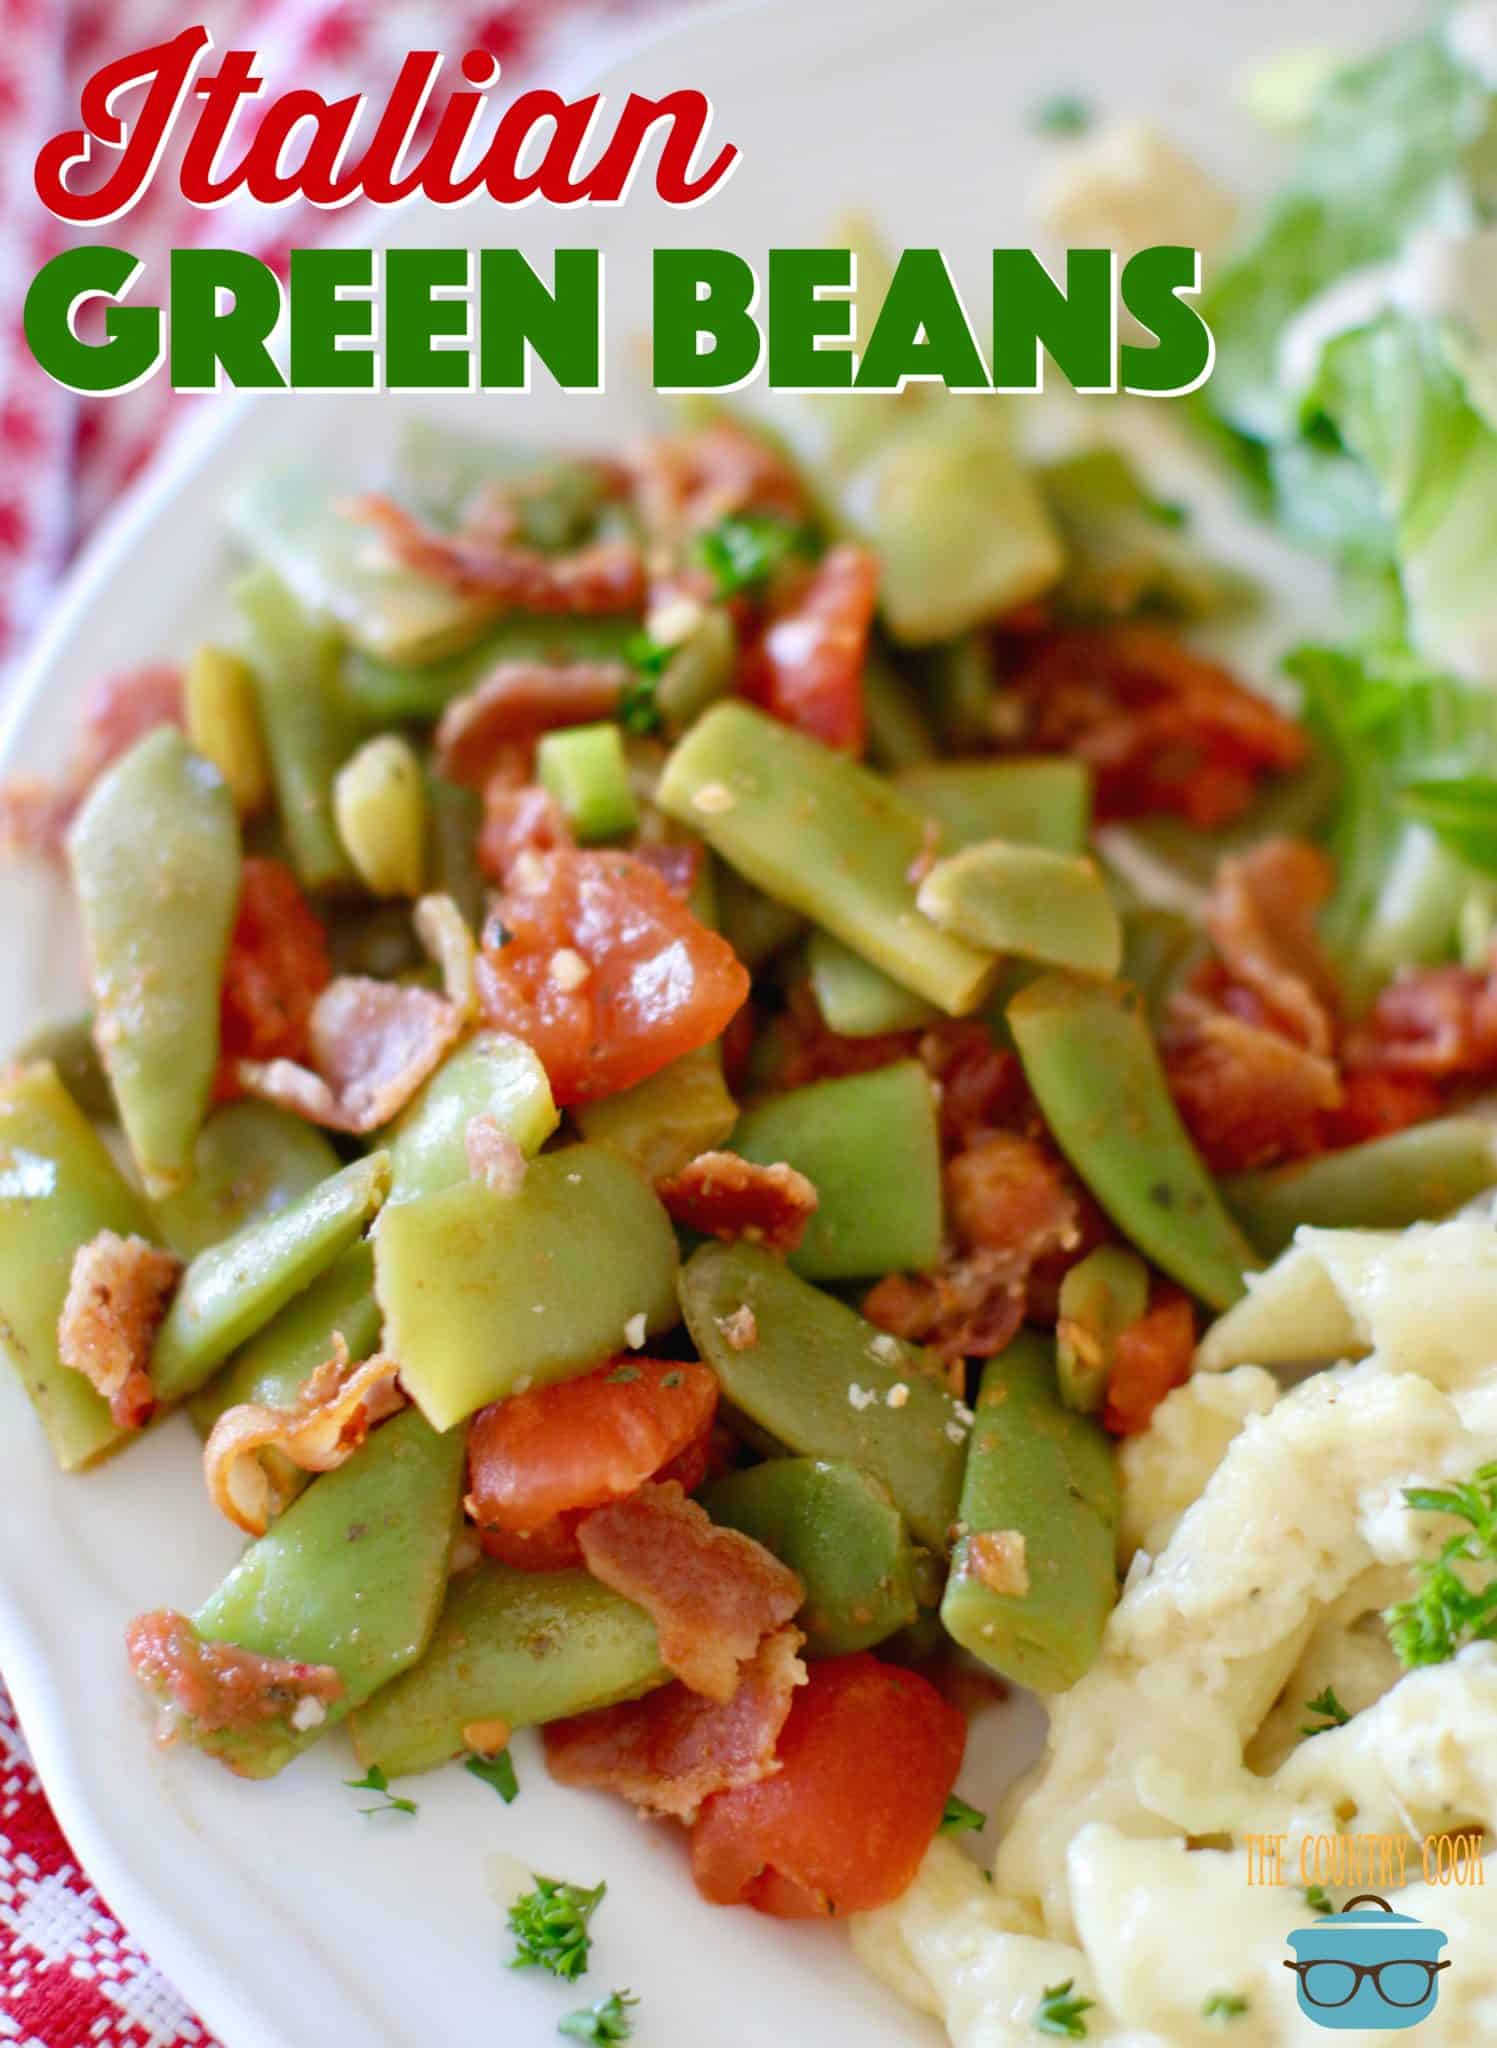 Italian Green Beans with bacon recipe from The Country Cook shown served on a round white plate.